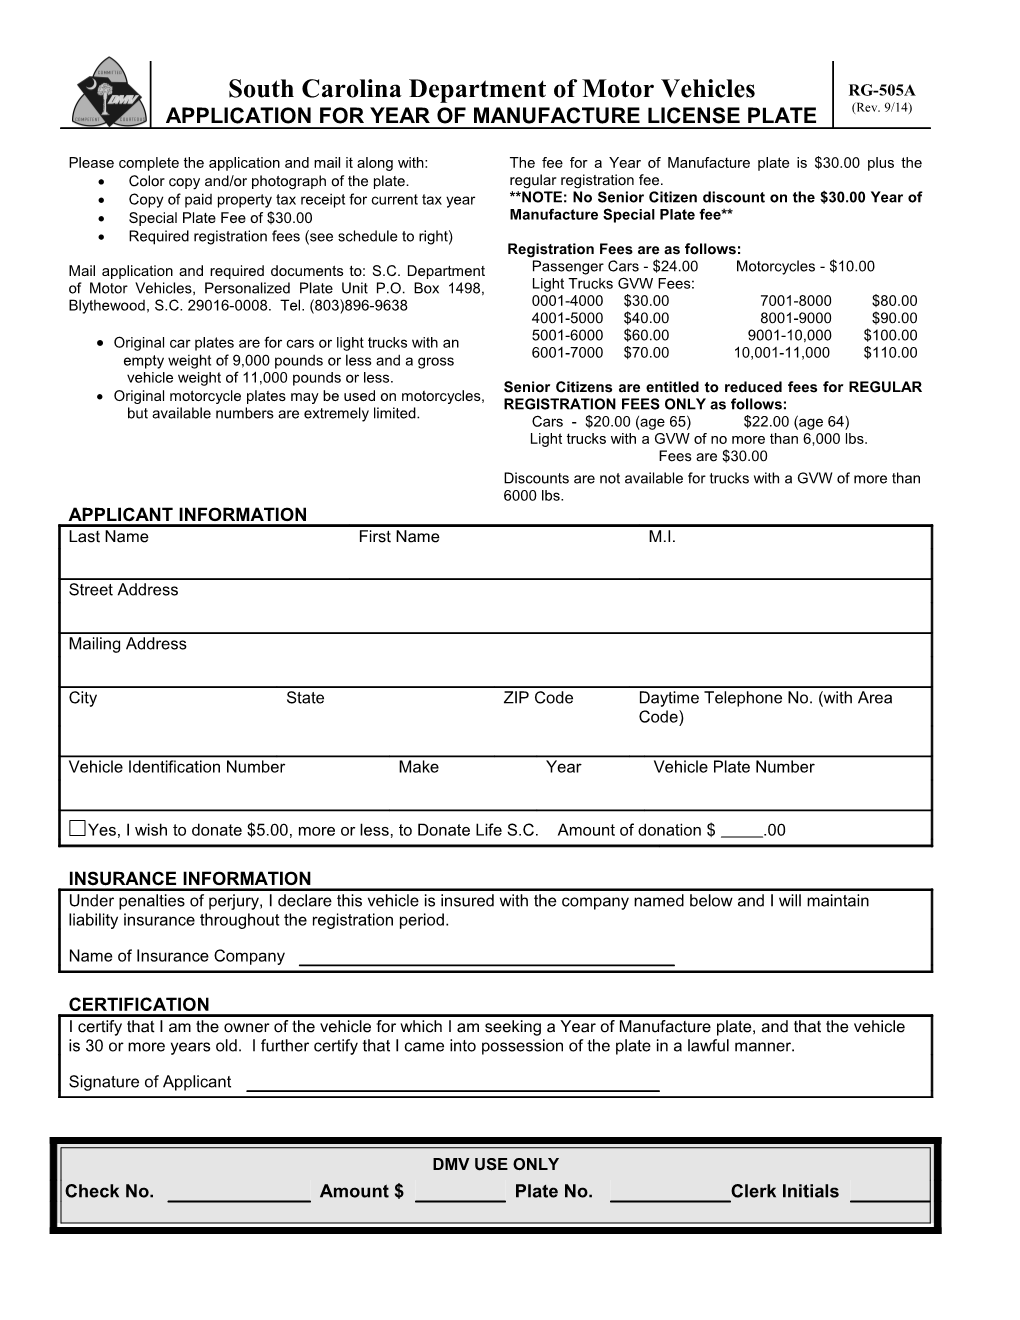 South Carolina Department of Motor Vehicles APPLICATION for YEAR of MANUFACTURE LICENSE PLATE